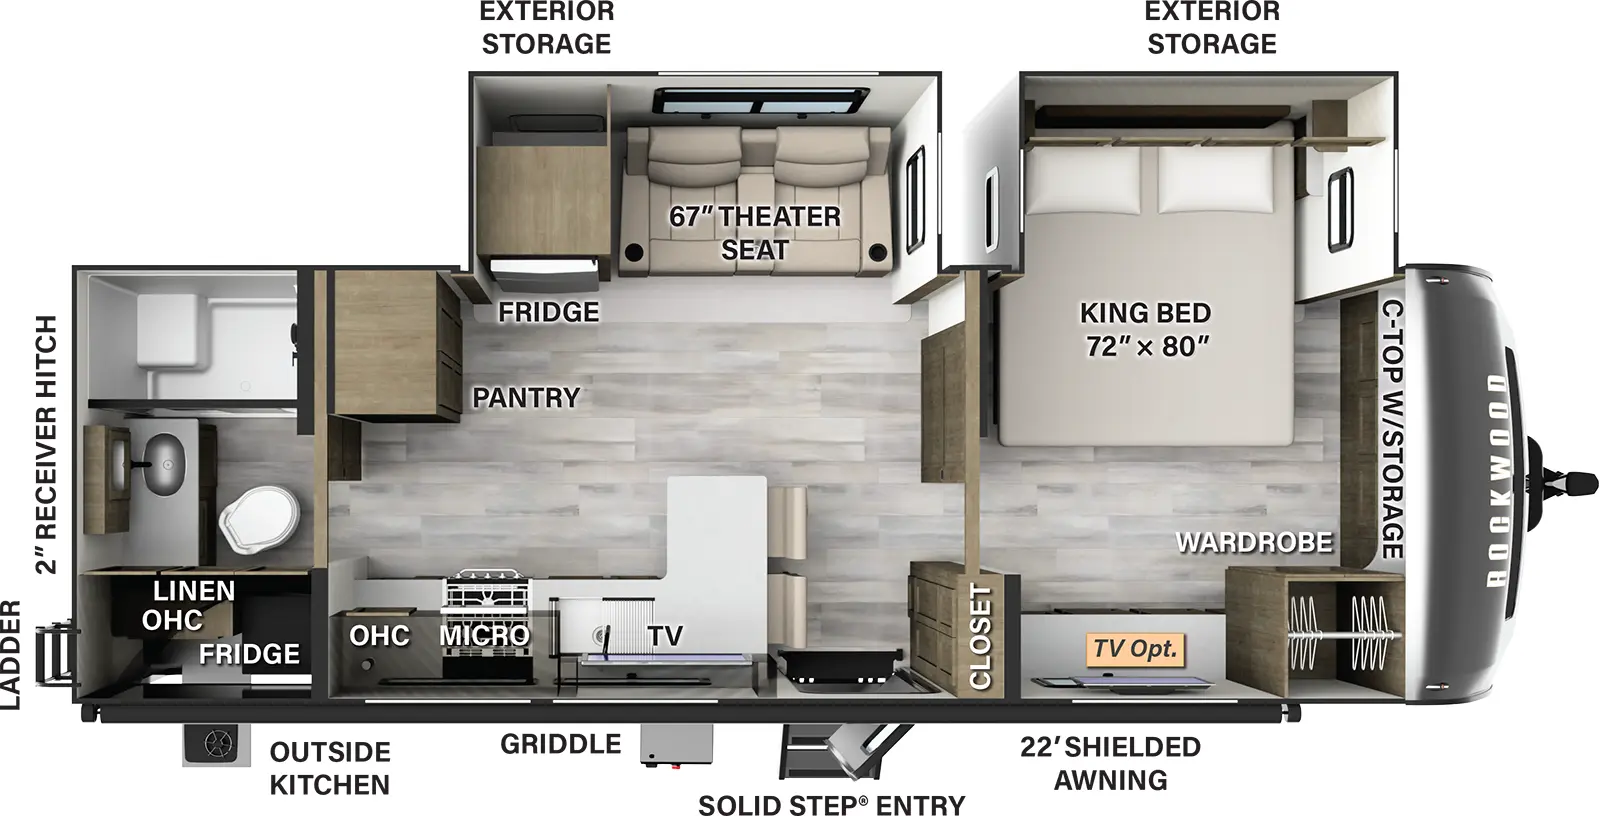 The 8265KBS has two slideouts and one entry. Exterior features 22 foot shielded awning, solid entry step, griddle, outside kitchen with refrigerator, exterior storage, rear ladder, and 2 inch receiver hitch. Interior layout front to back: front countertop with storage, off-door side king bed slideout, door side wardrobe and optional TV; off-door side slideout with theater seat and refrigerator, and a pantry; door side closet, entry, peninsula kitchen counter with seating that wraps to door side with sink, microwave, cooktop and overhead cabinet; rear full bathroom with linen closet.